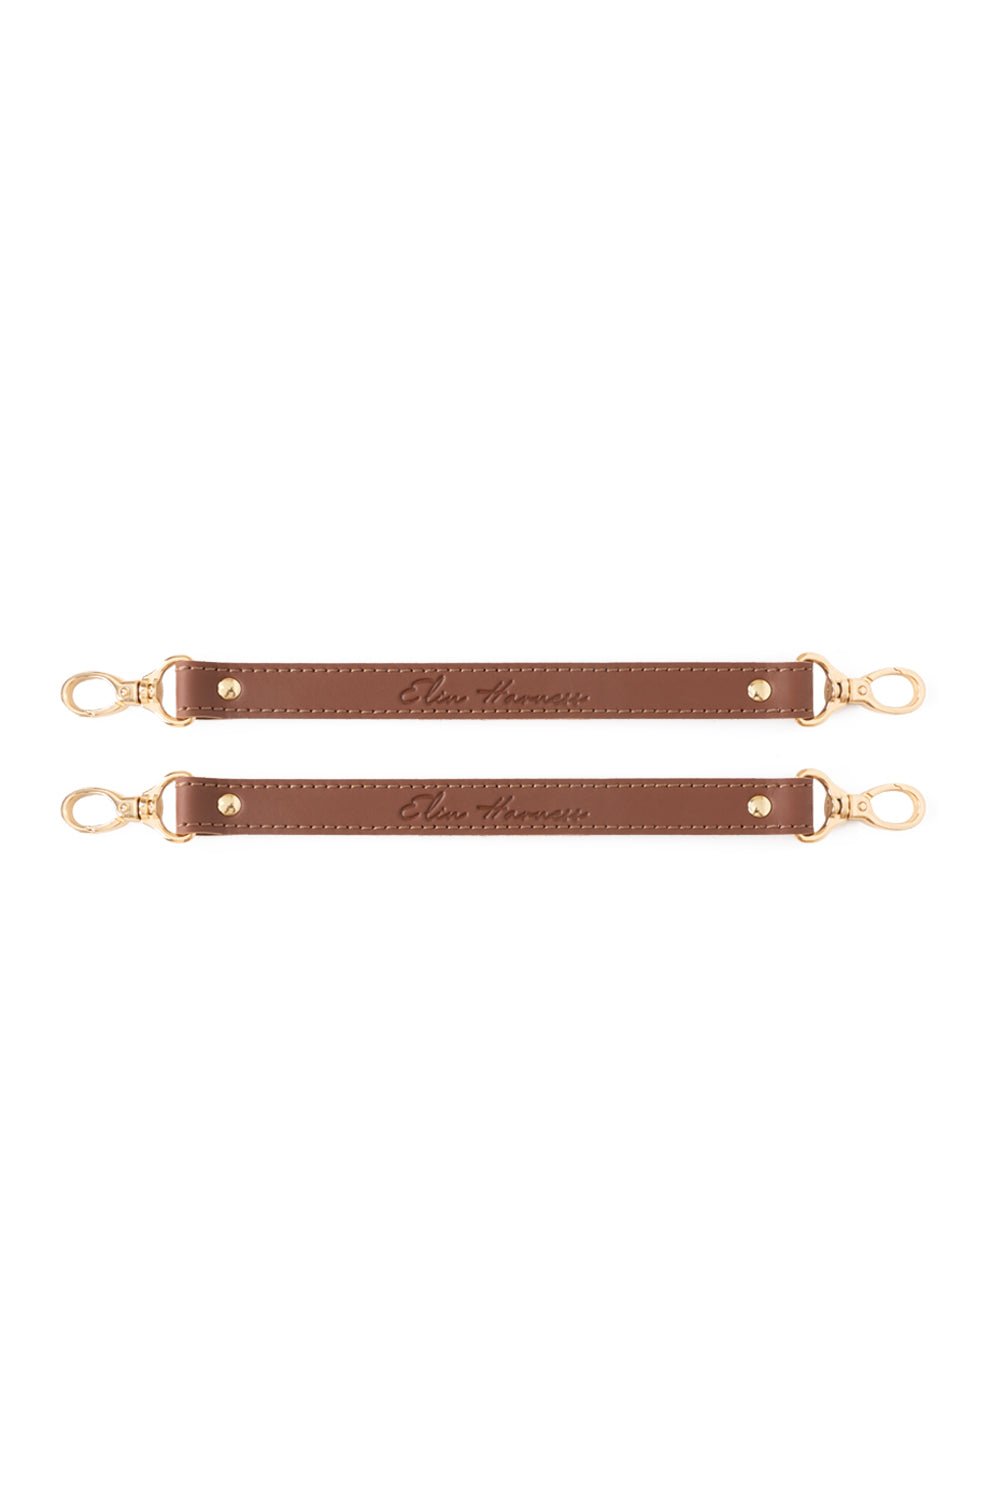 2-Way Extended Leather Connector. Set of 2 Straps for Fixation